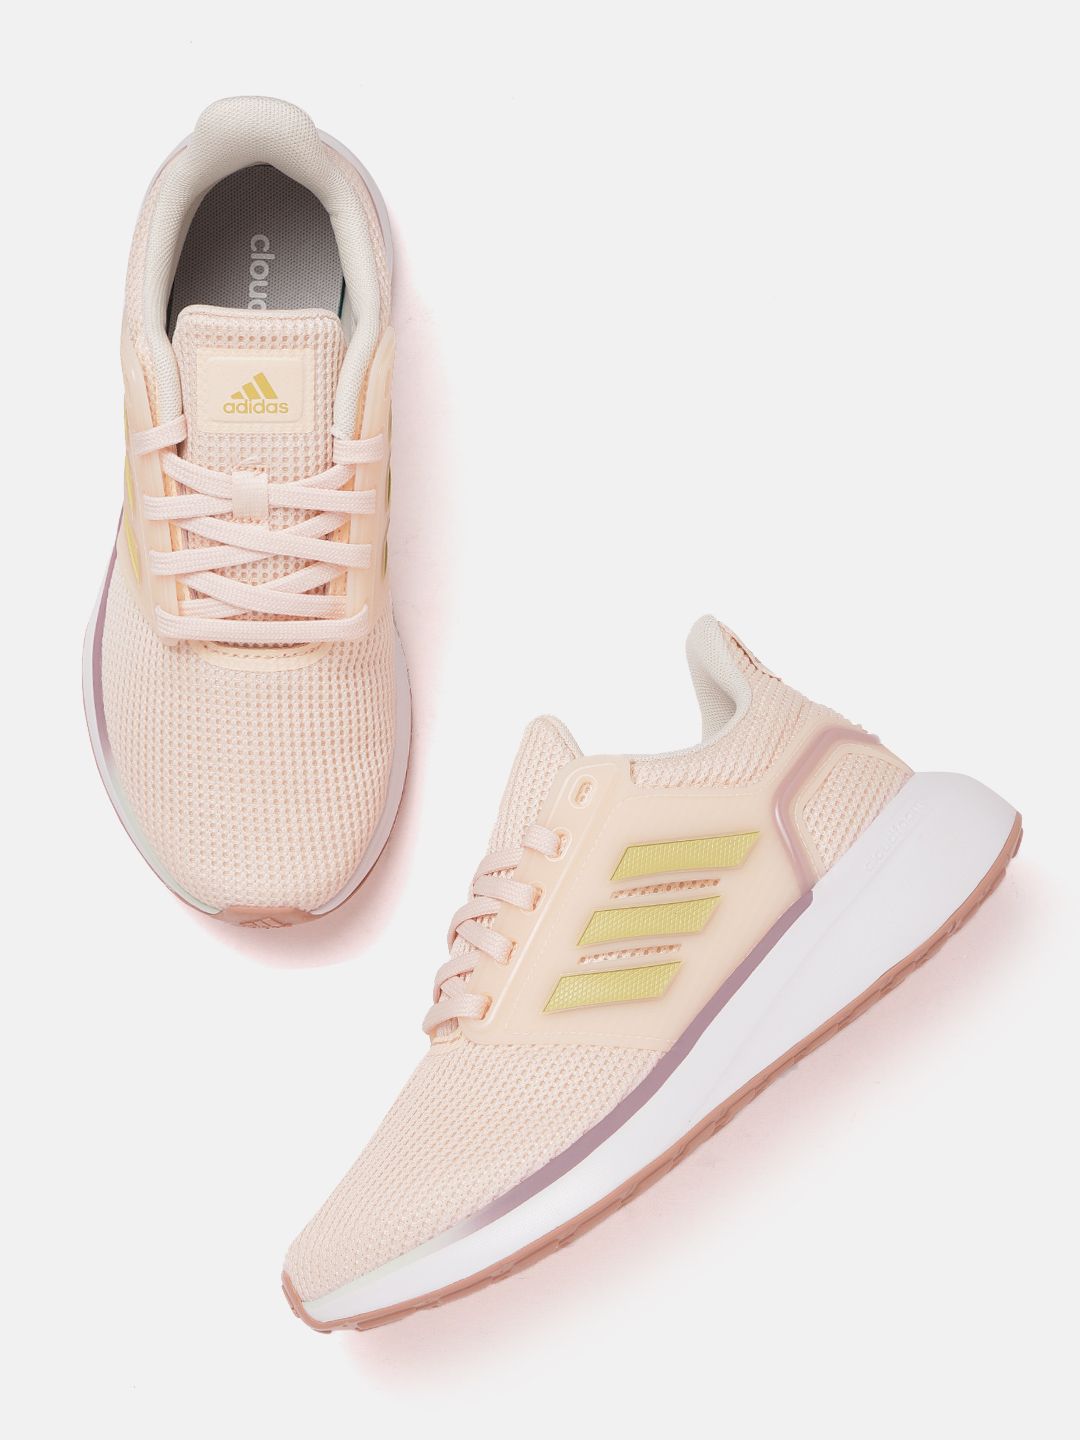 ADIDAS Women Peach-Coloured Woven Design EQ19 Running Shoes Price in India